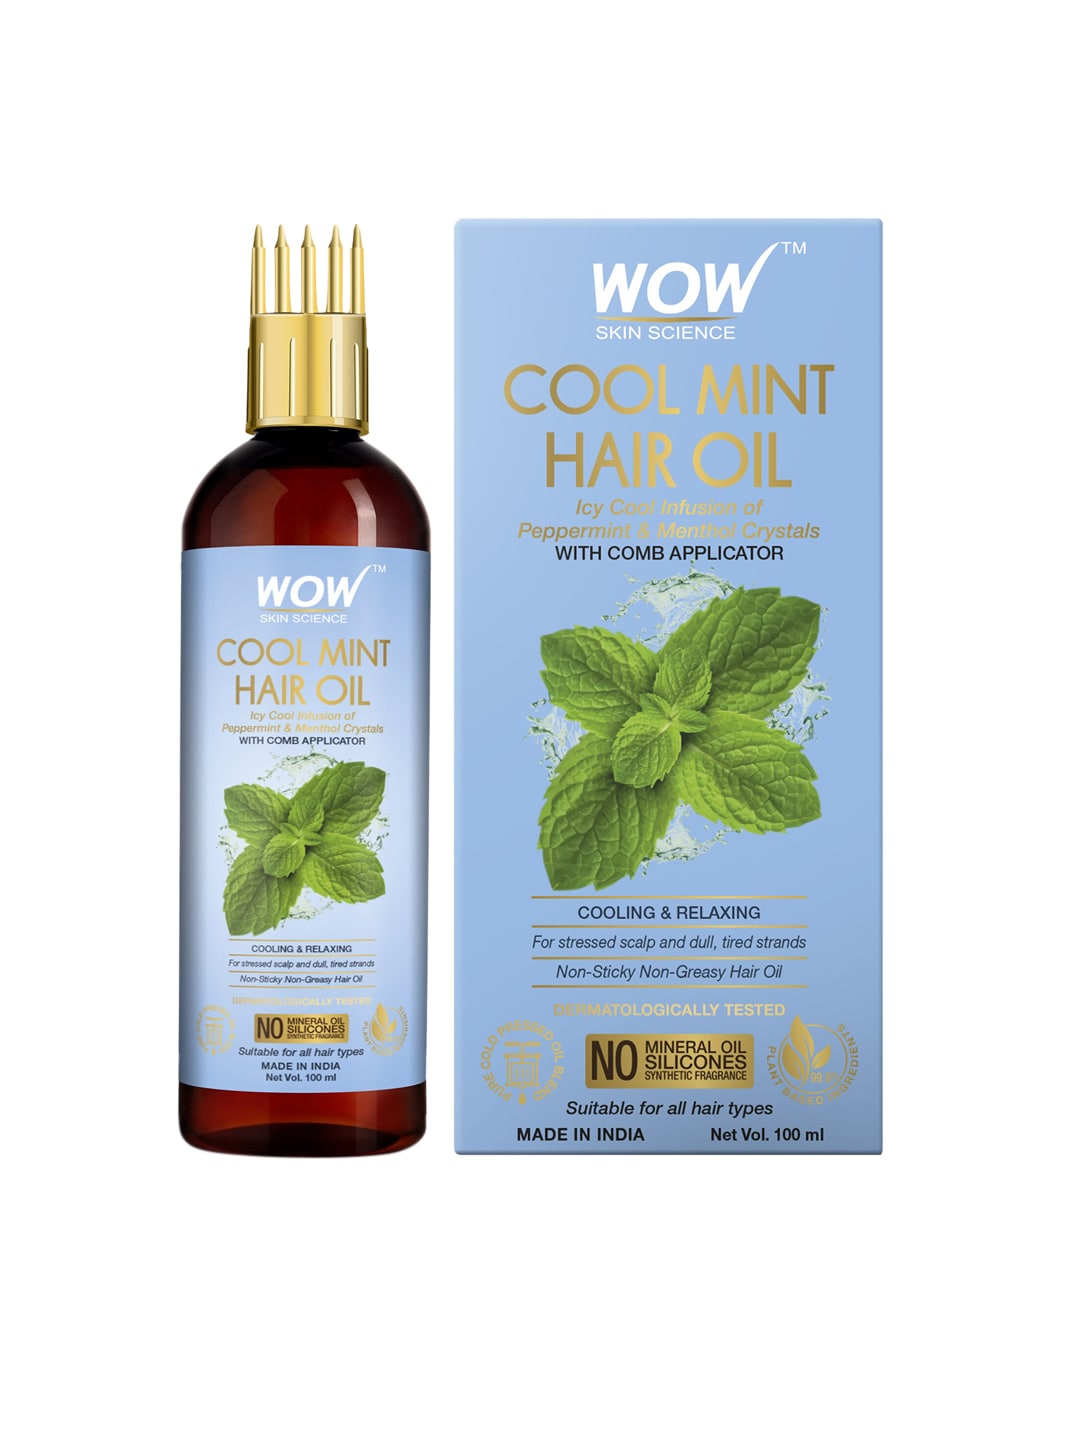 WOW SKIN SCIENCE Cool Mint Hair Oil - 100ml Price in India